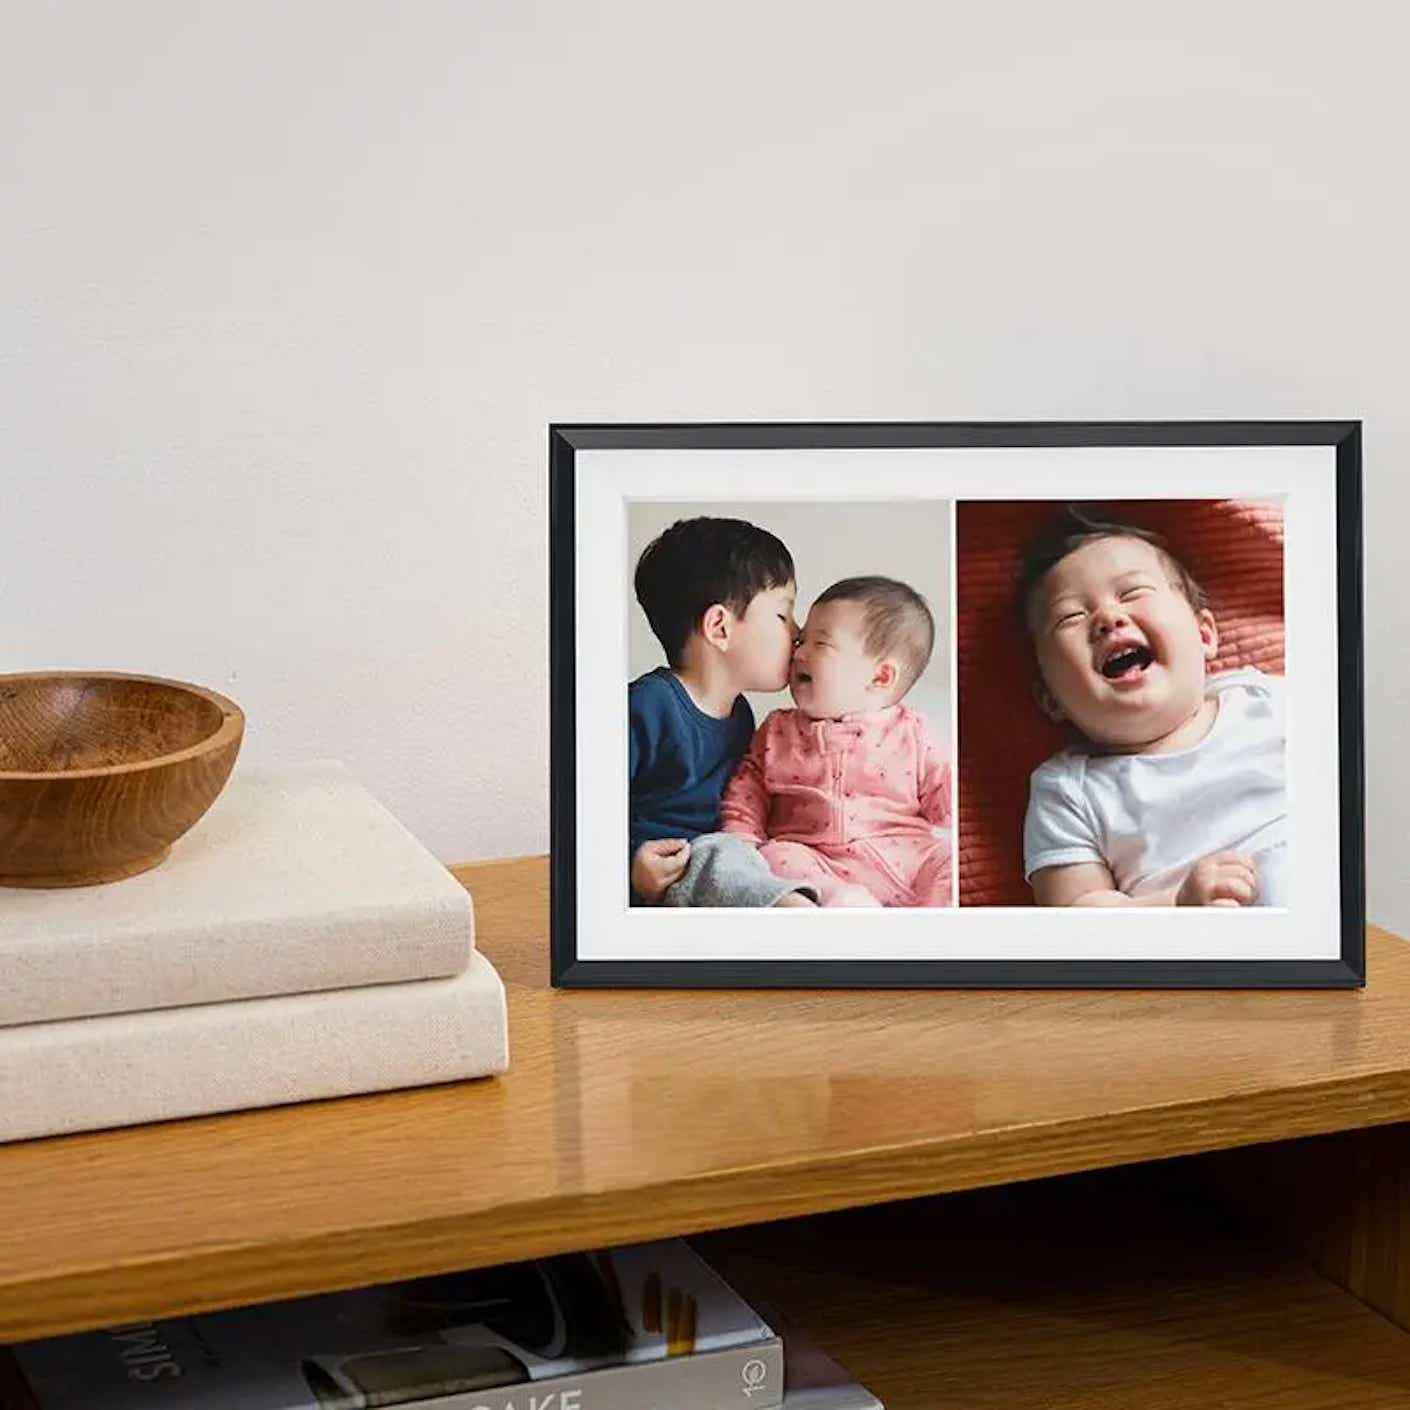 A digital picture frame on a table.